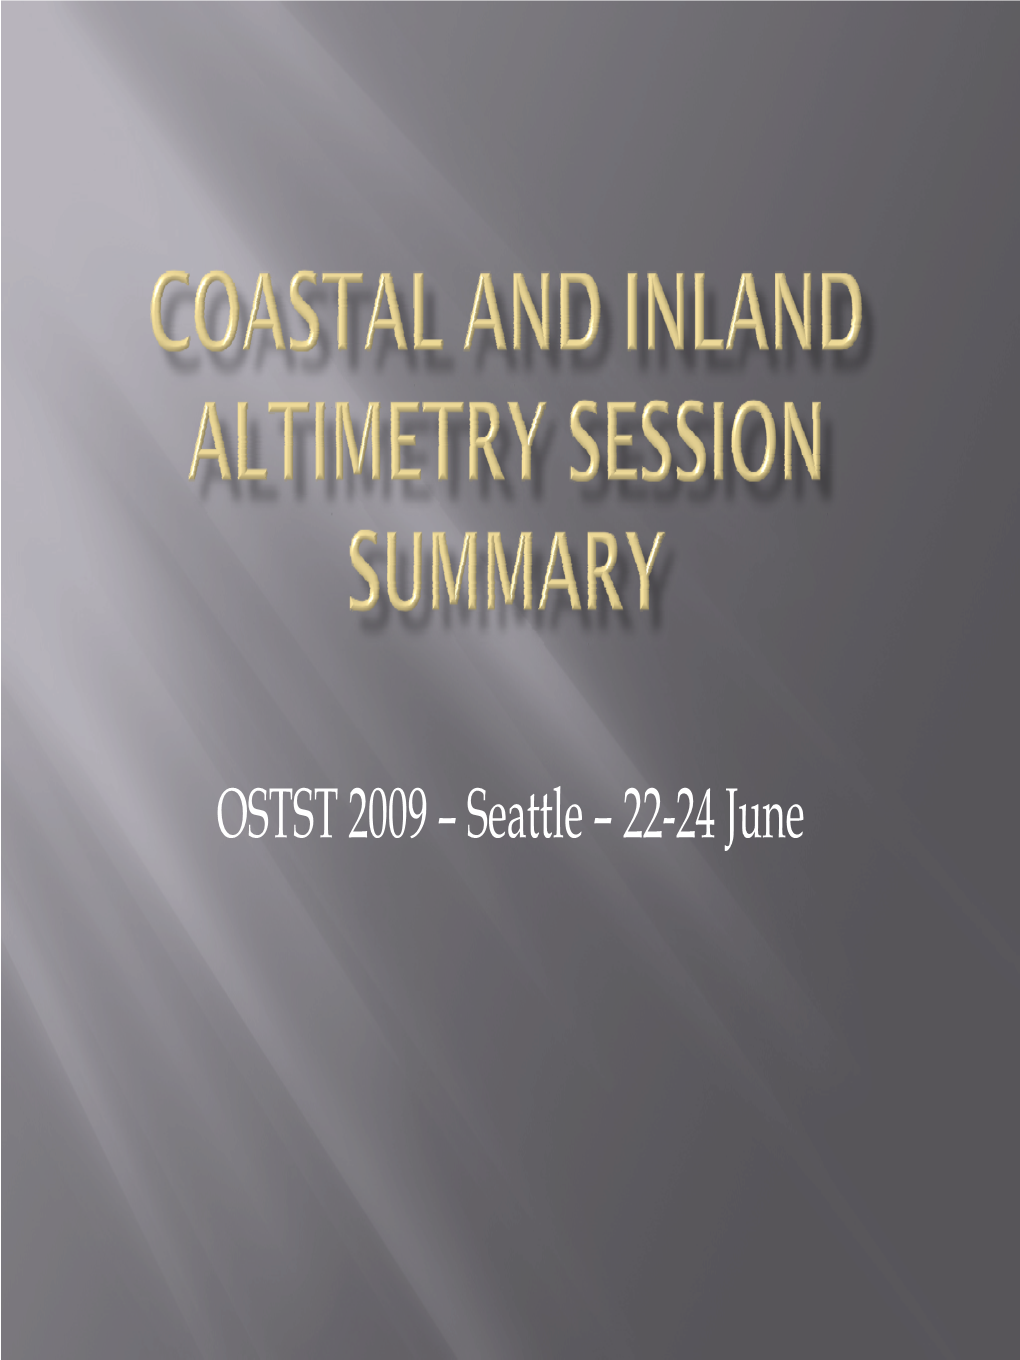 Coastal and Inland Altimetry SESSION